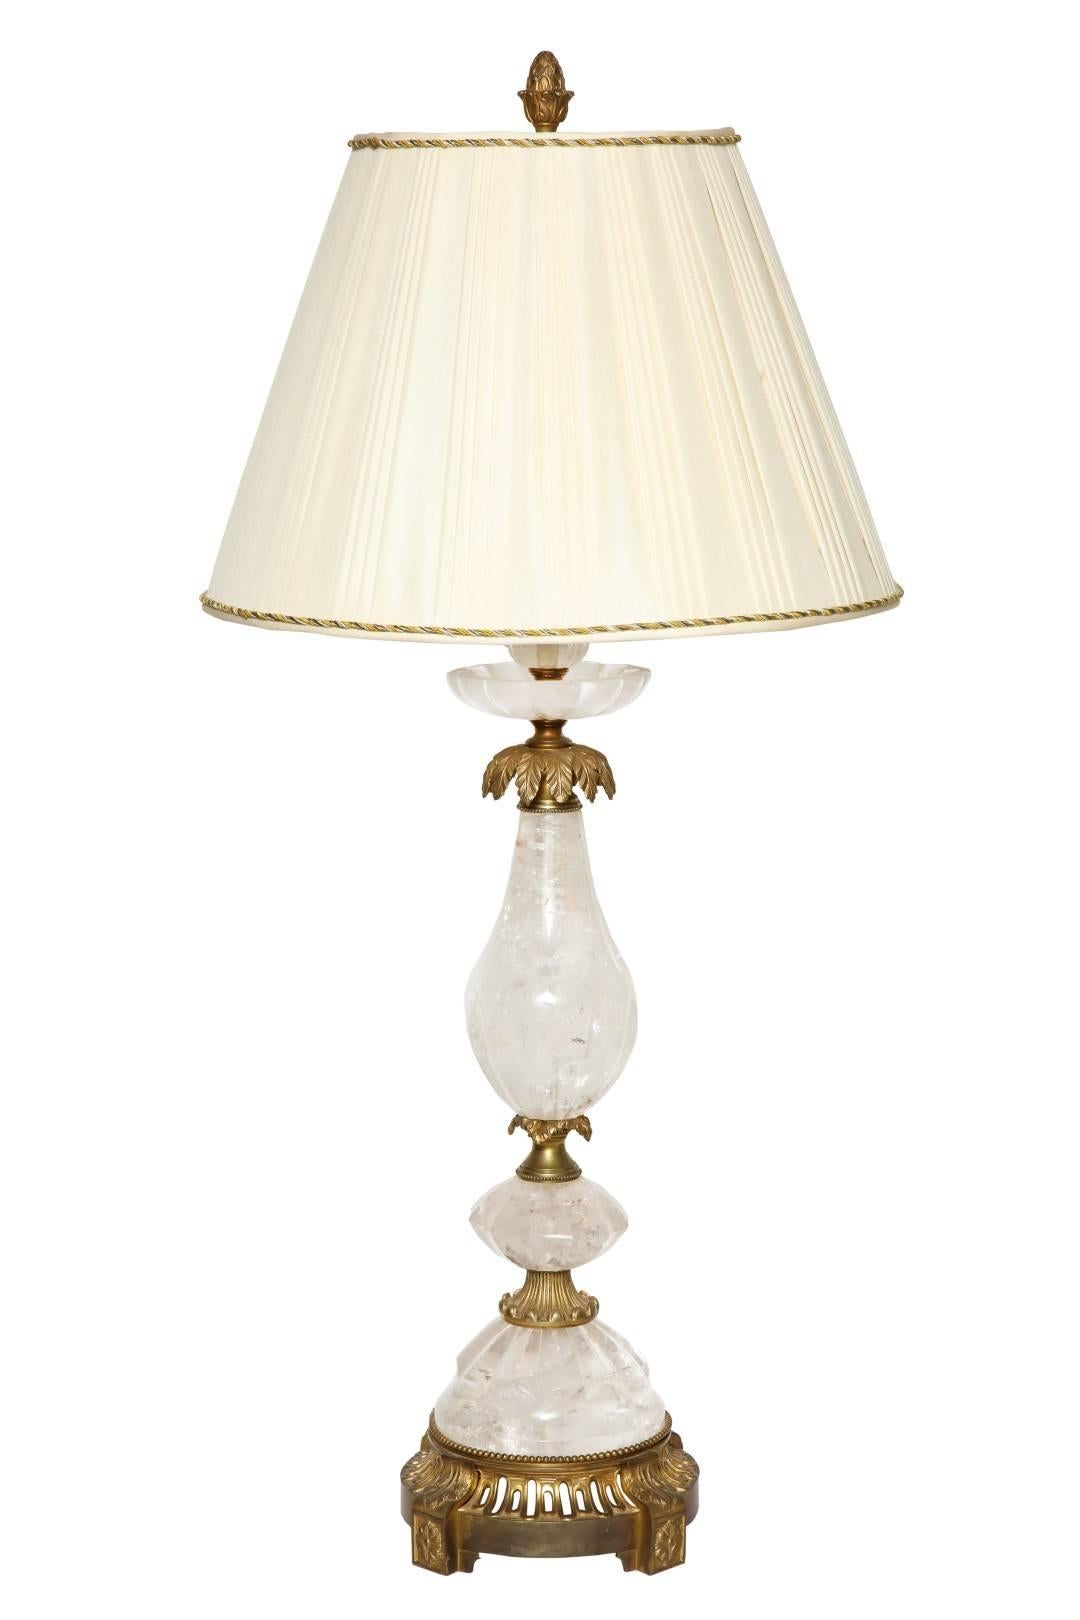 A pair of new rock crystal table lamps with antique gilt brass fittings, the palm frond collar resting on a baluster shaped rock crystal shaft, the pierced circular base resting on four corbel form supports with acanthus leaf and rosette details,